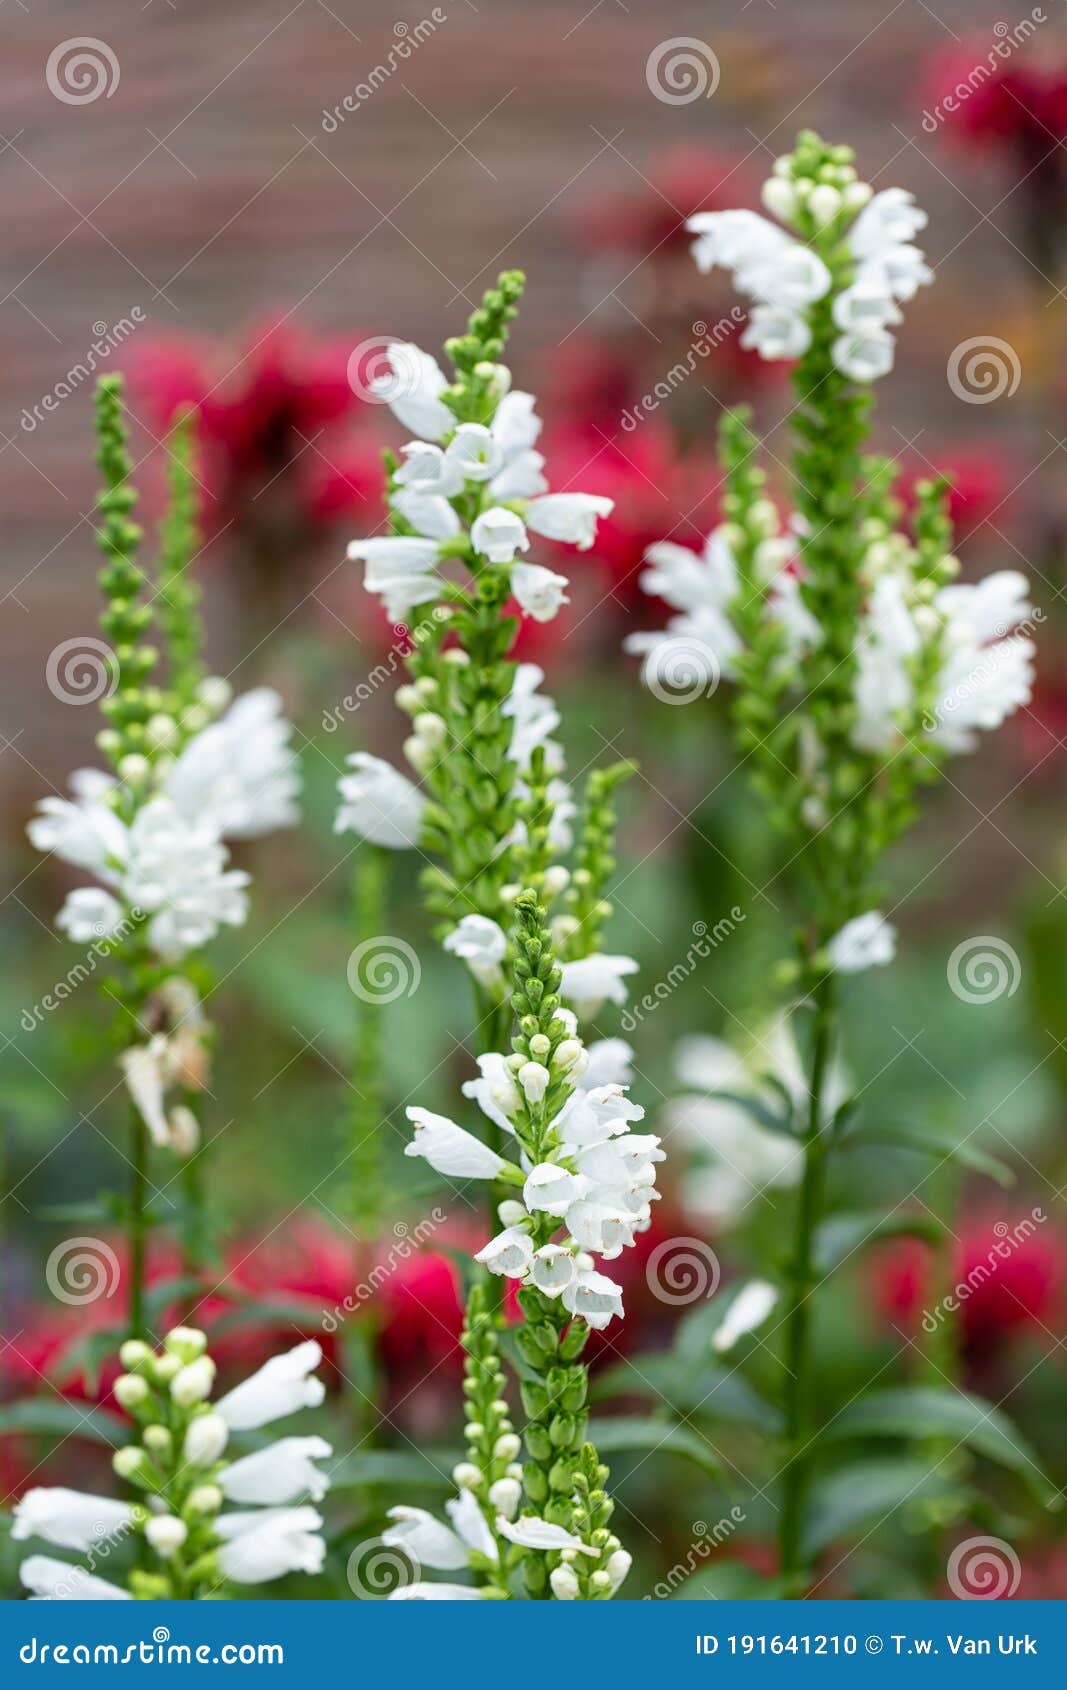 white physostegia flowers with red monada flowers at the background